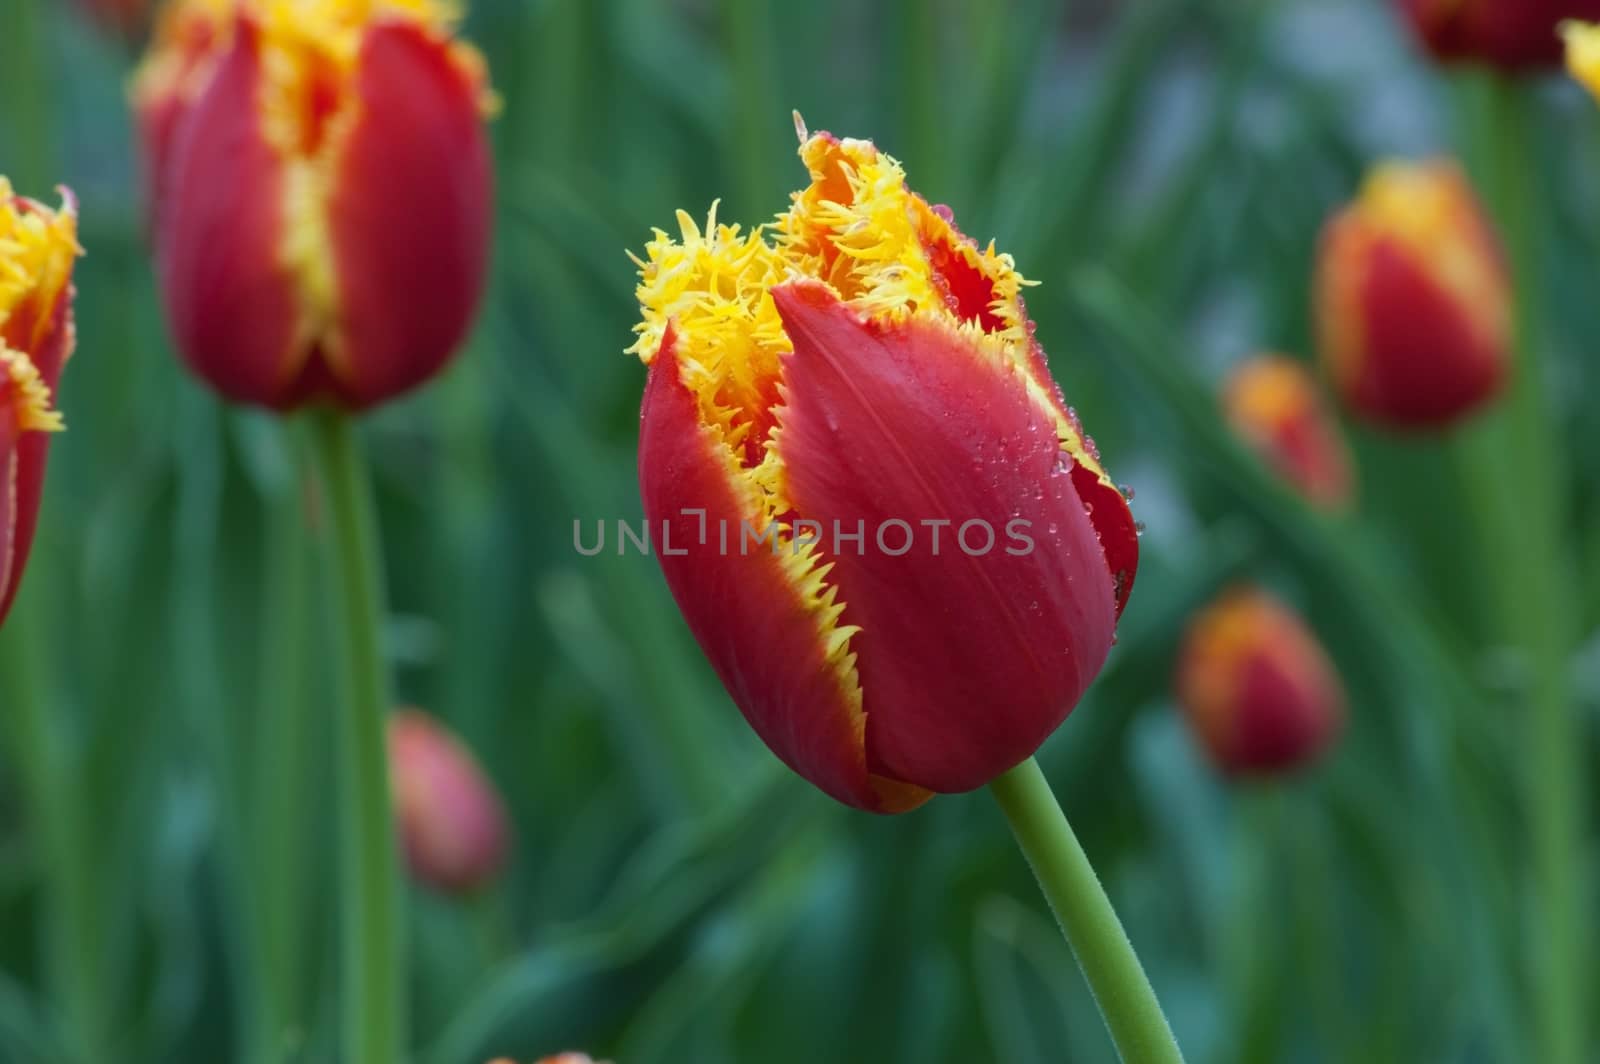 red and yellow tulip by PavelS